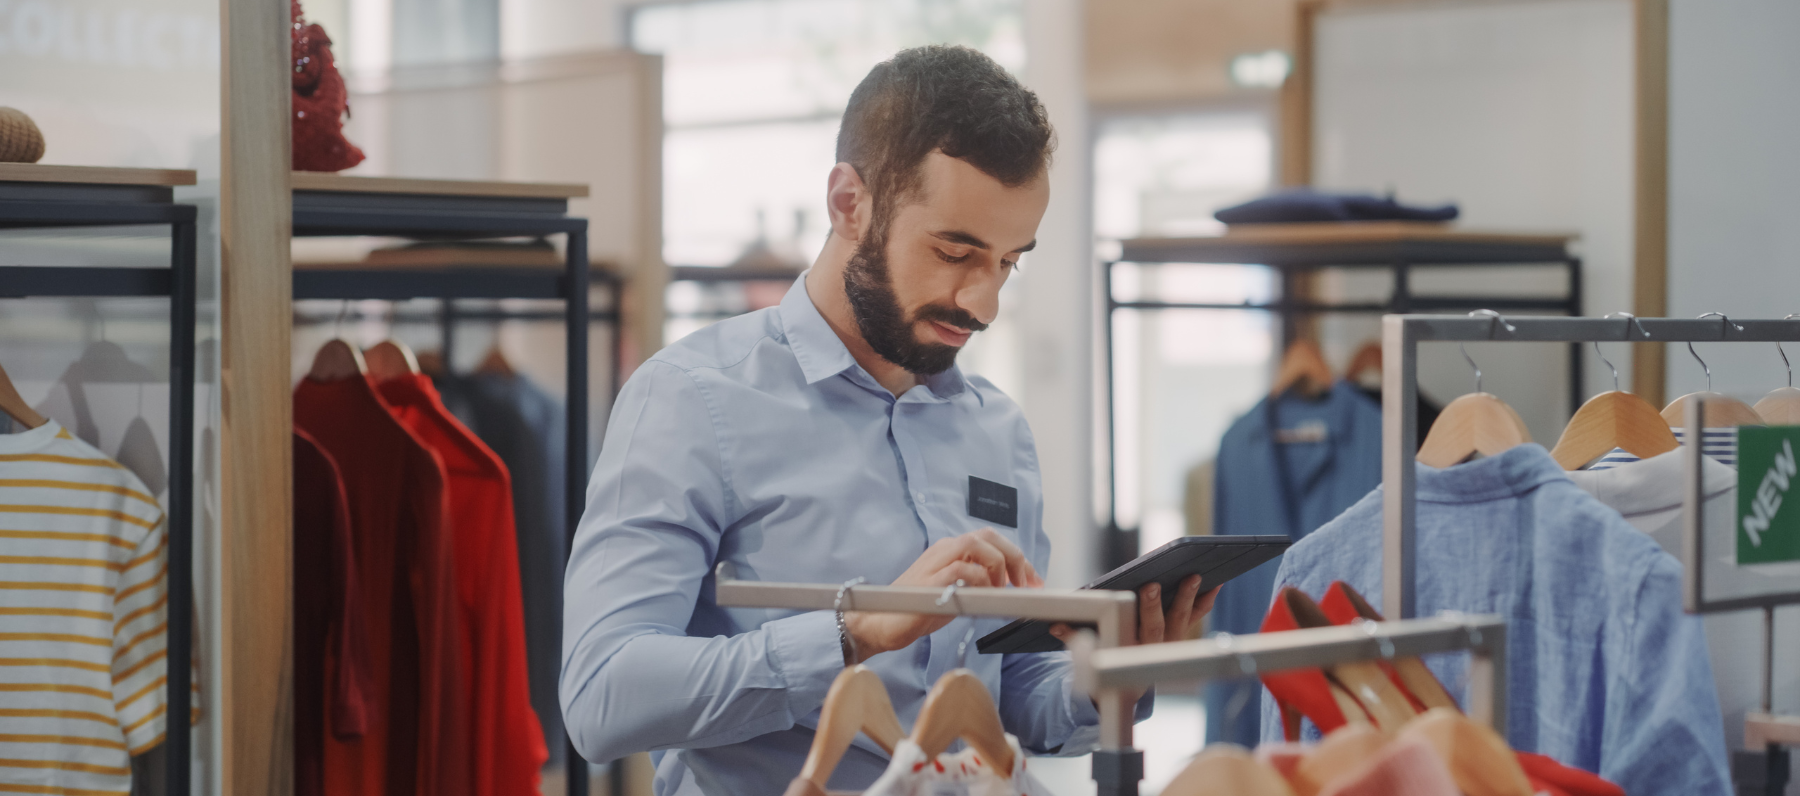 Supply Chain Challenges in the Retail Industry